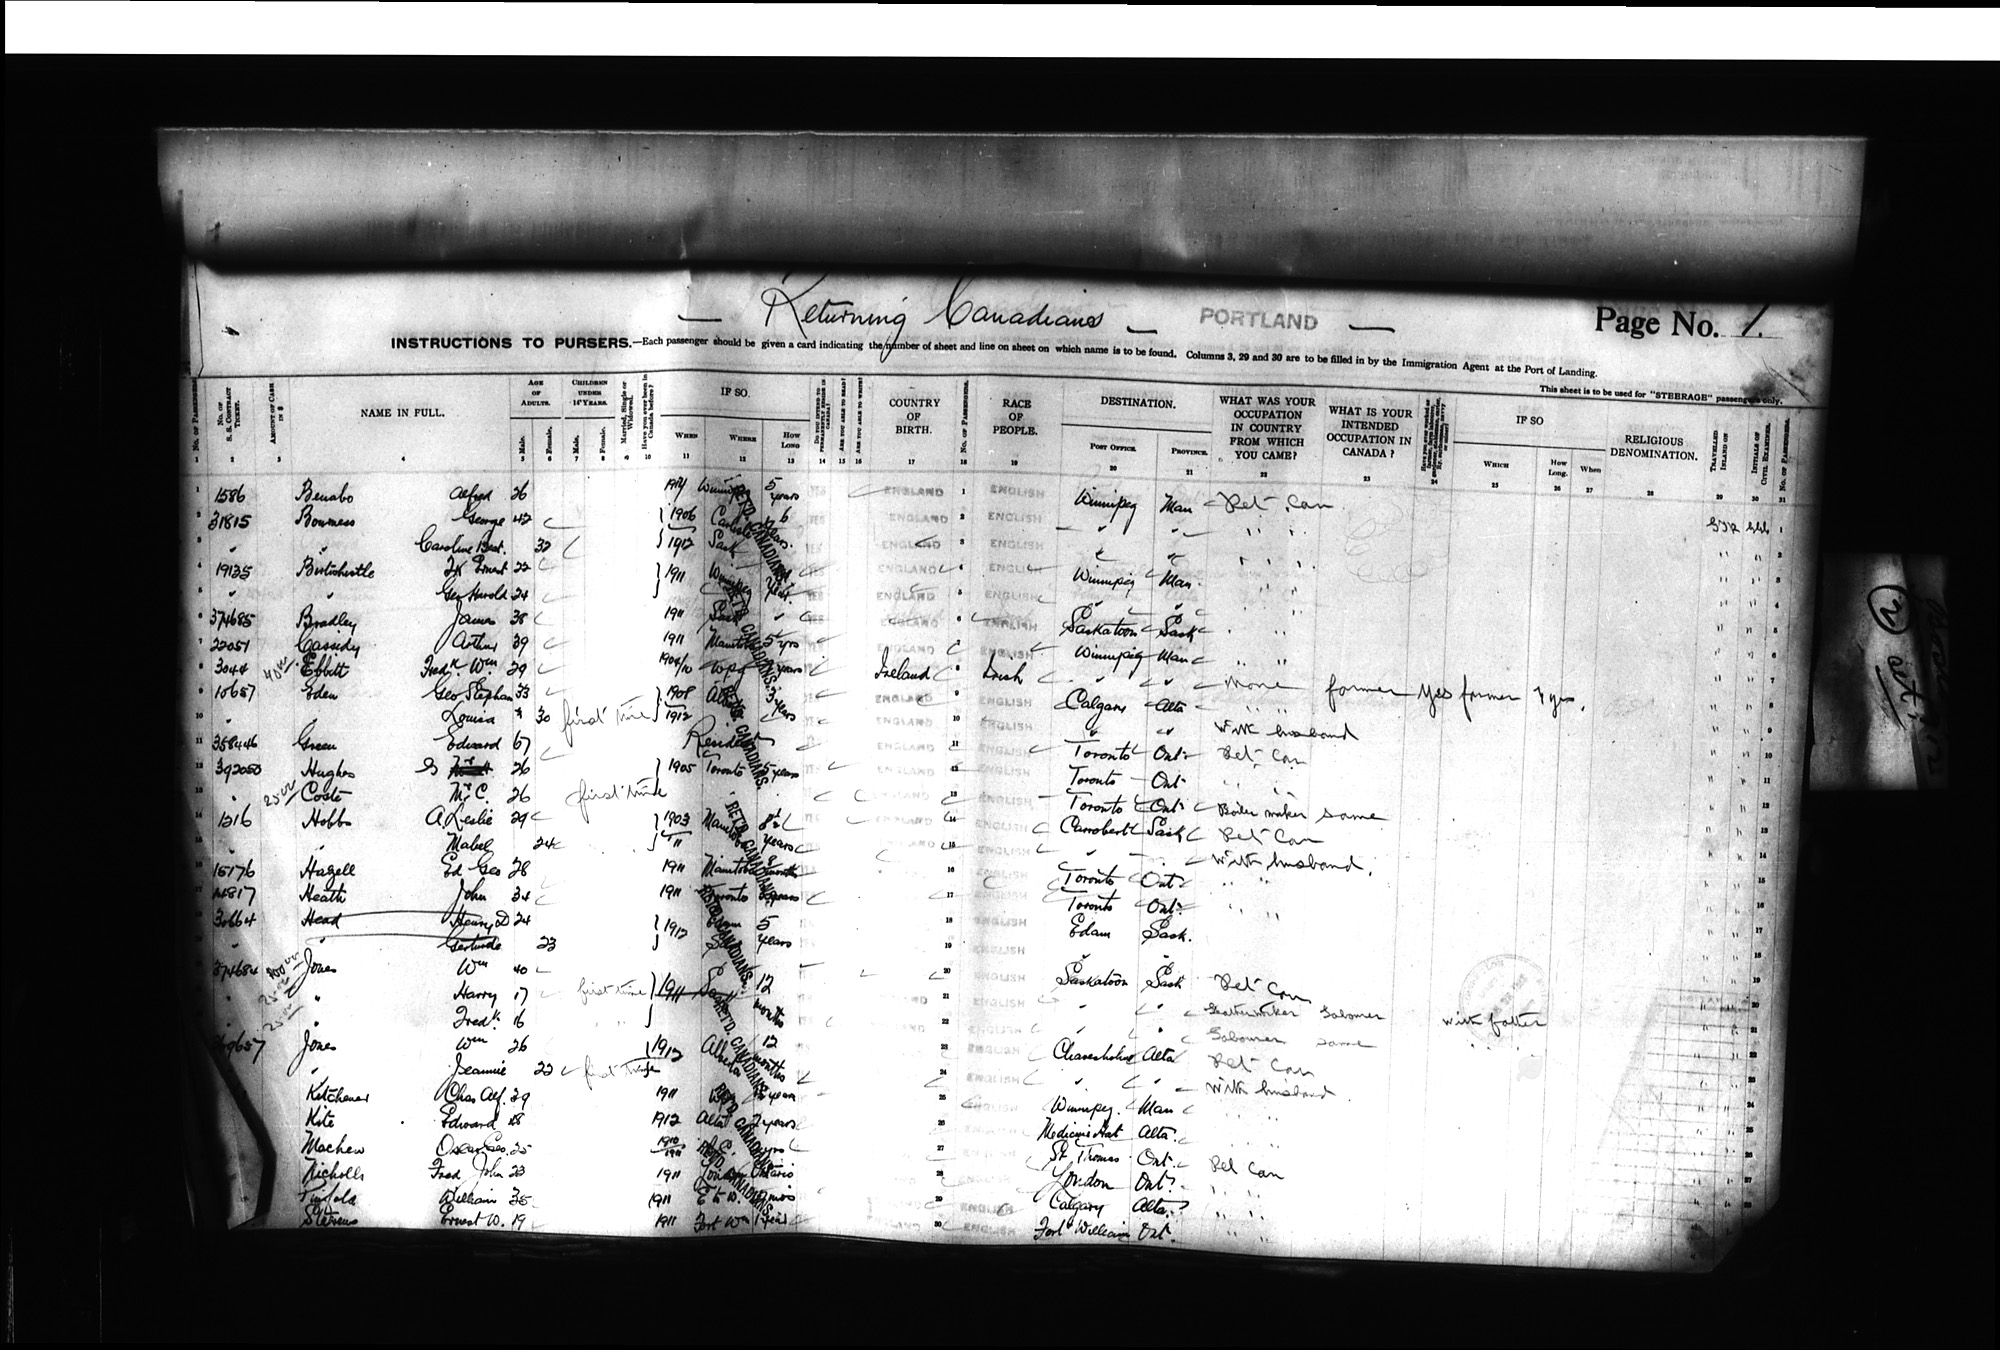 Digitized page of Passenger Lists for Image No.: CANIMM1913PLIST_0000406960-00174